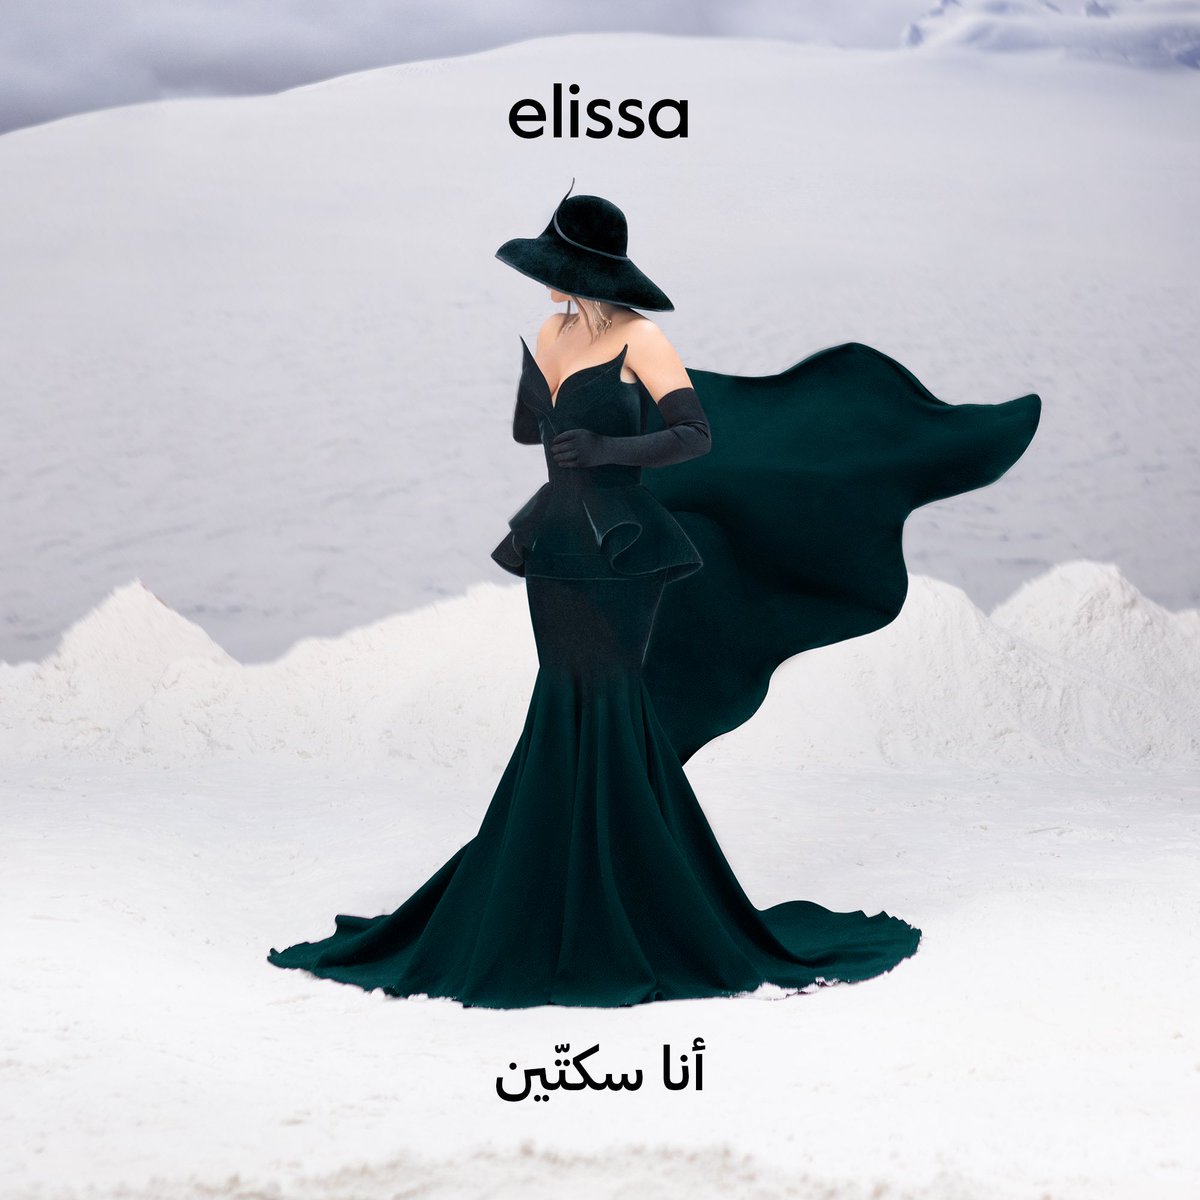 Elissa in a 1992 Thierry Mugler dress for her album cover Photography and creative direction by me Produced by @plastikstudios 2022